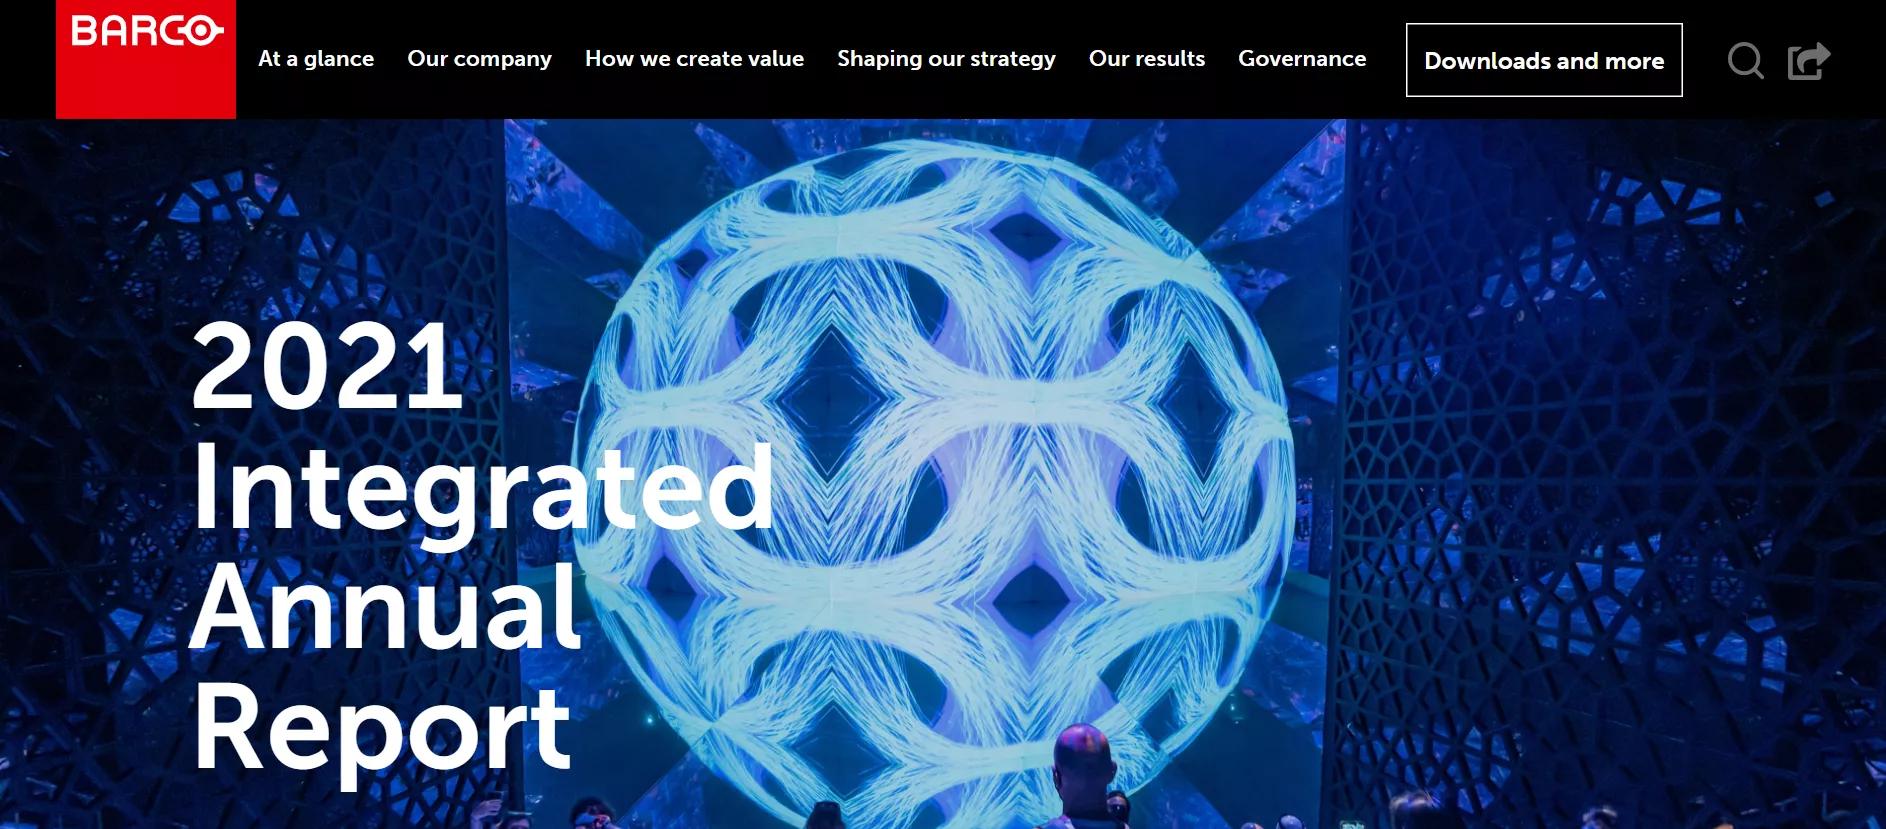 Printscreen of the homepage of Barco's 2021 annual integrated report